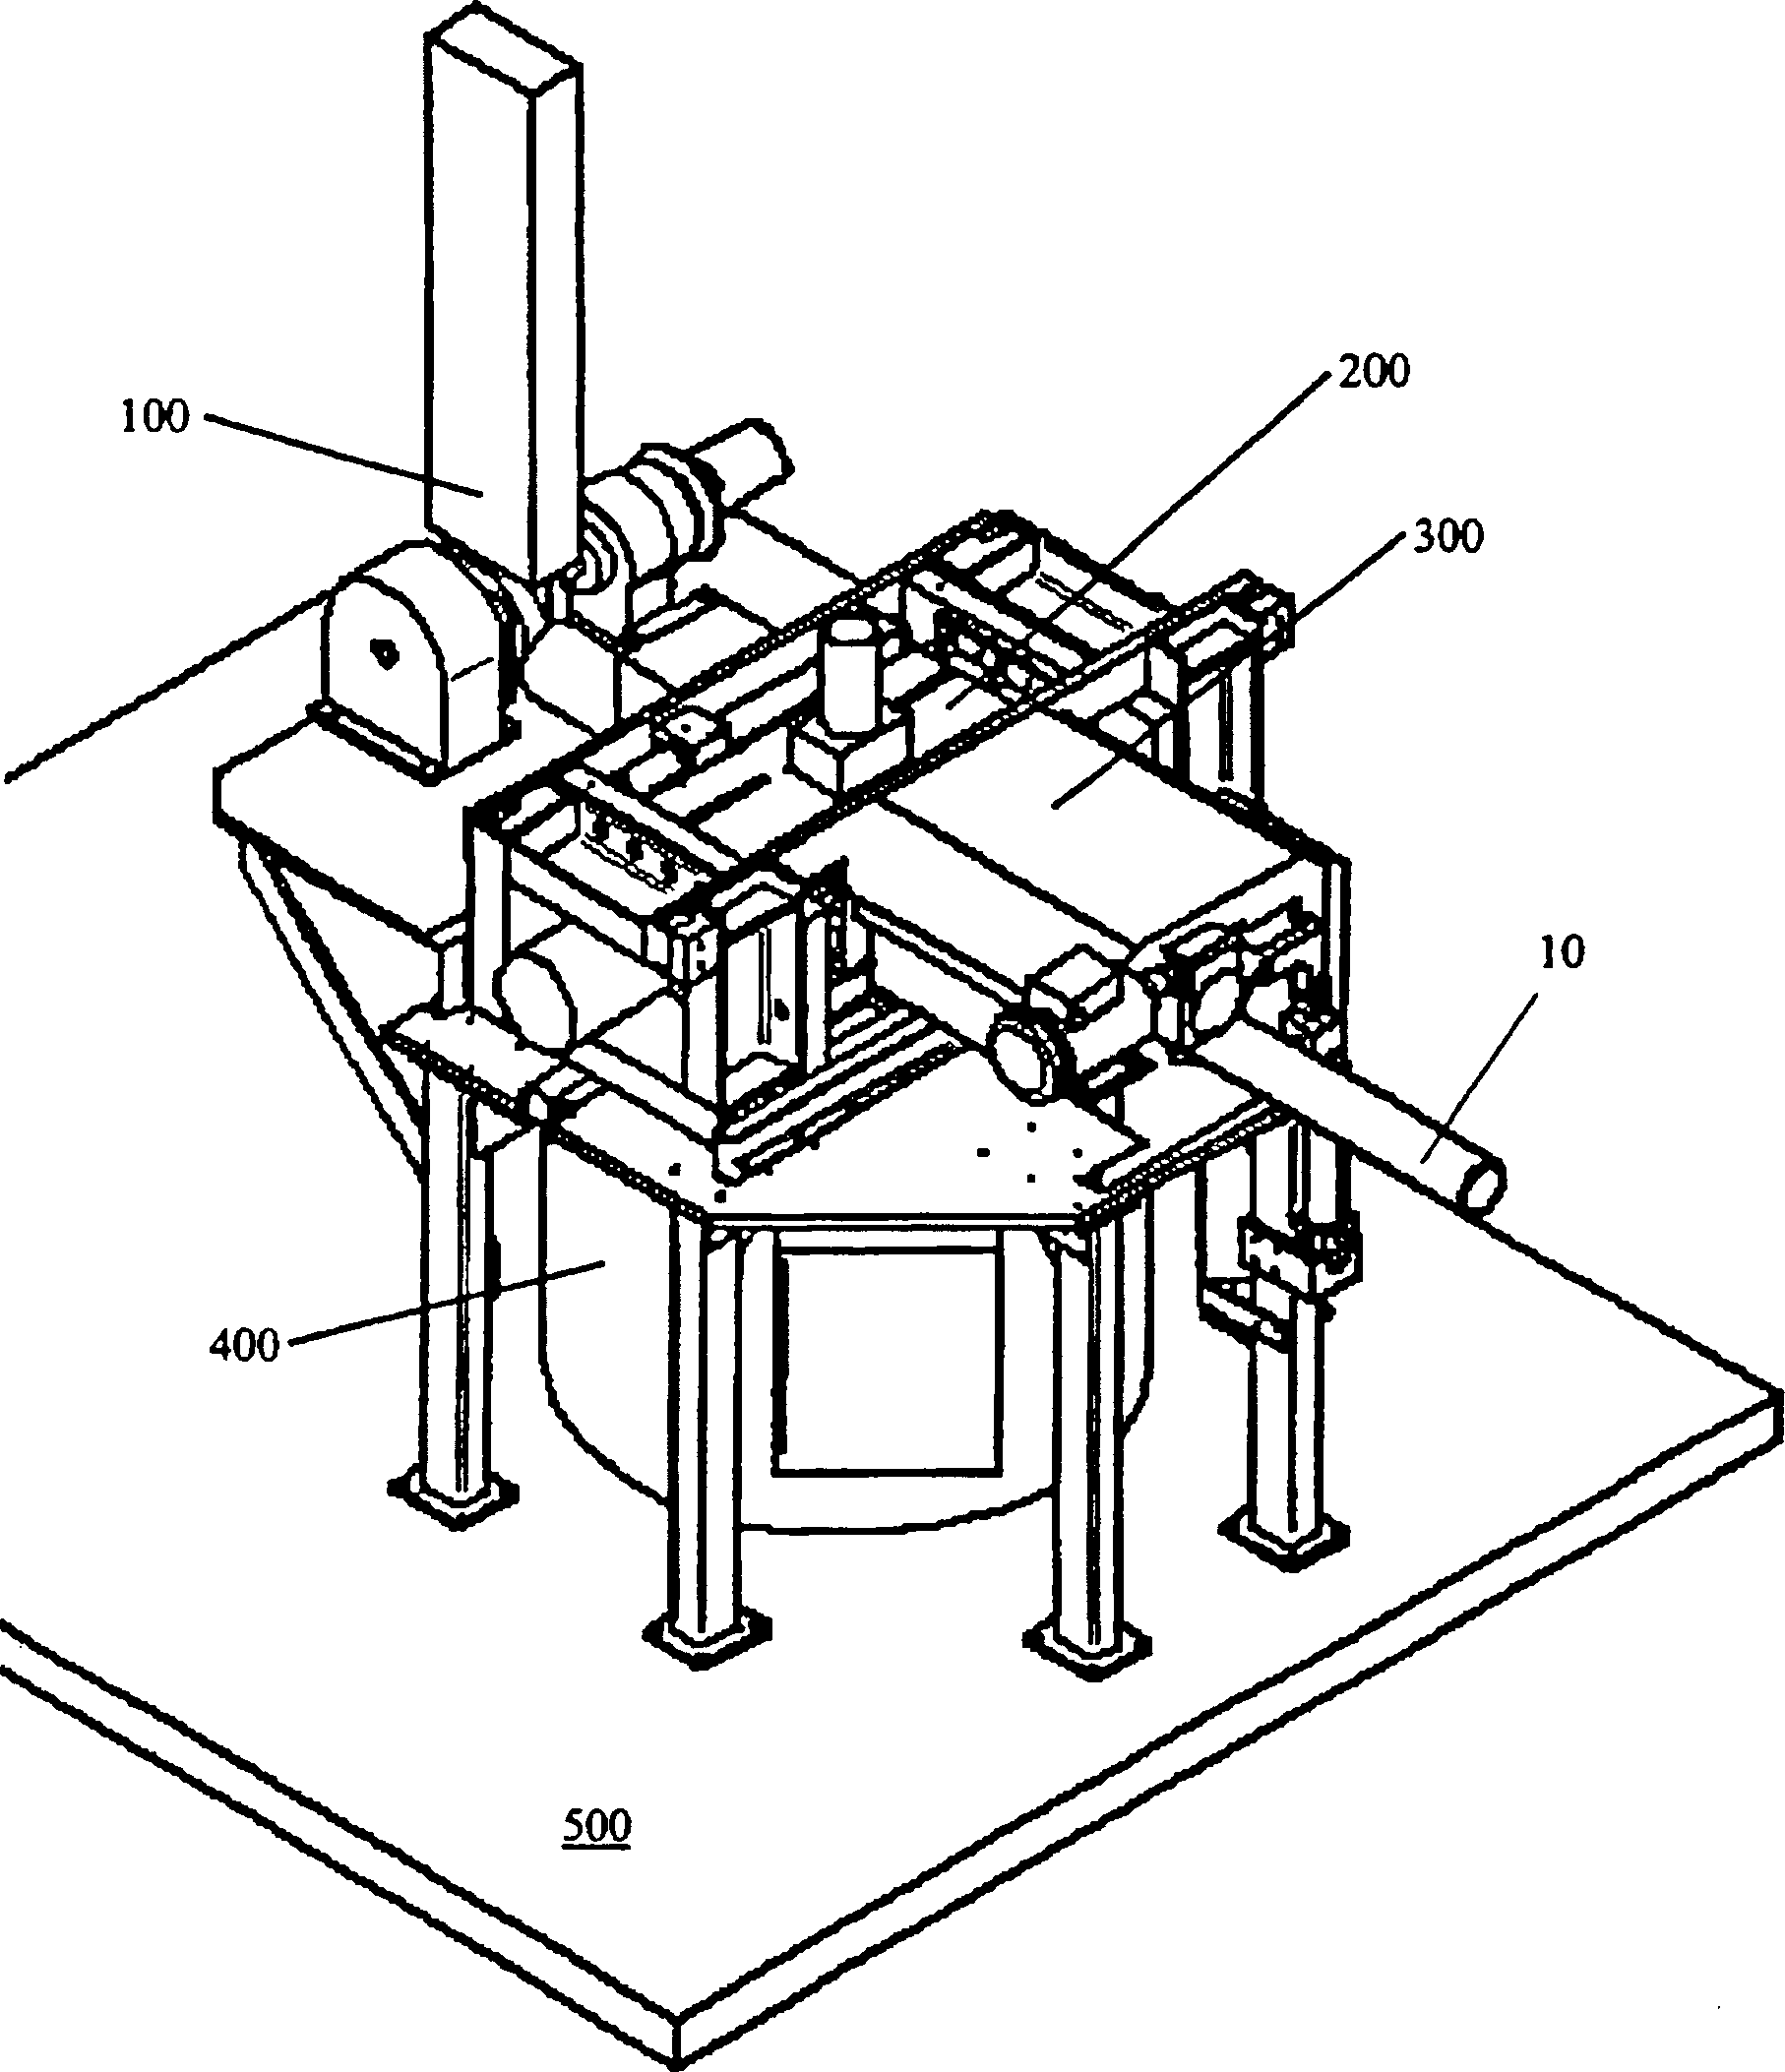 Checkerboard shear volume reduction system